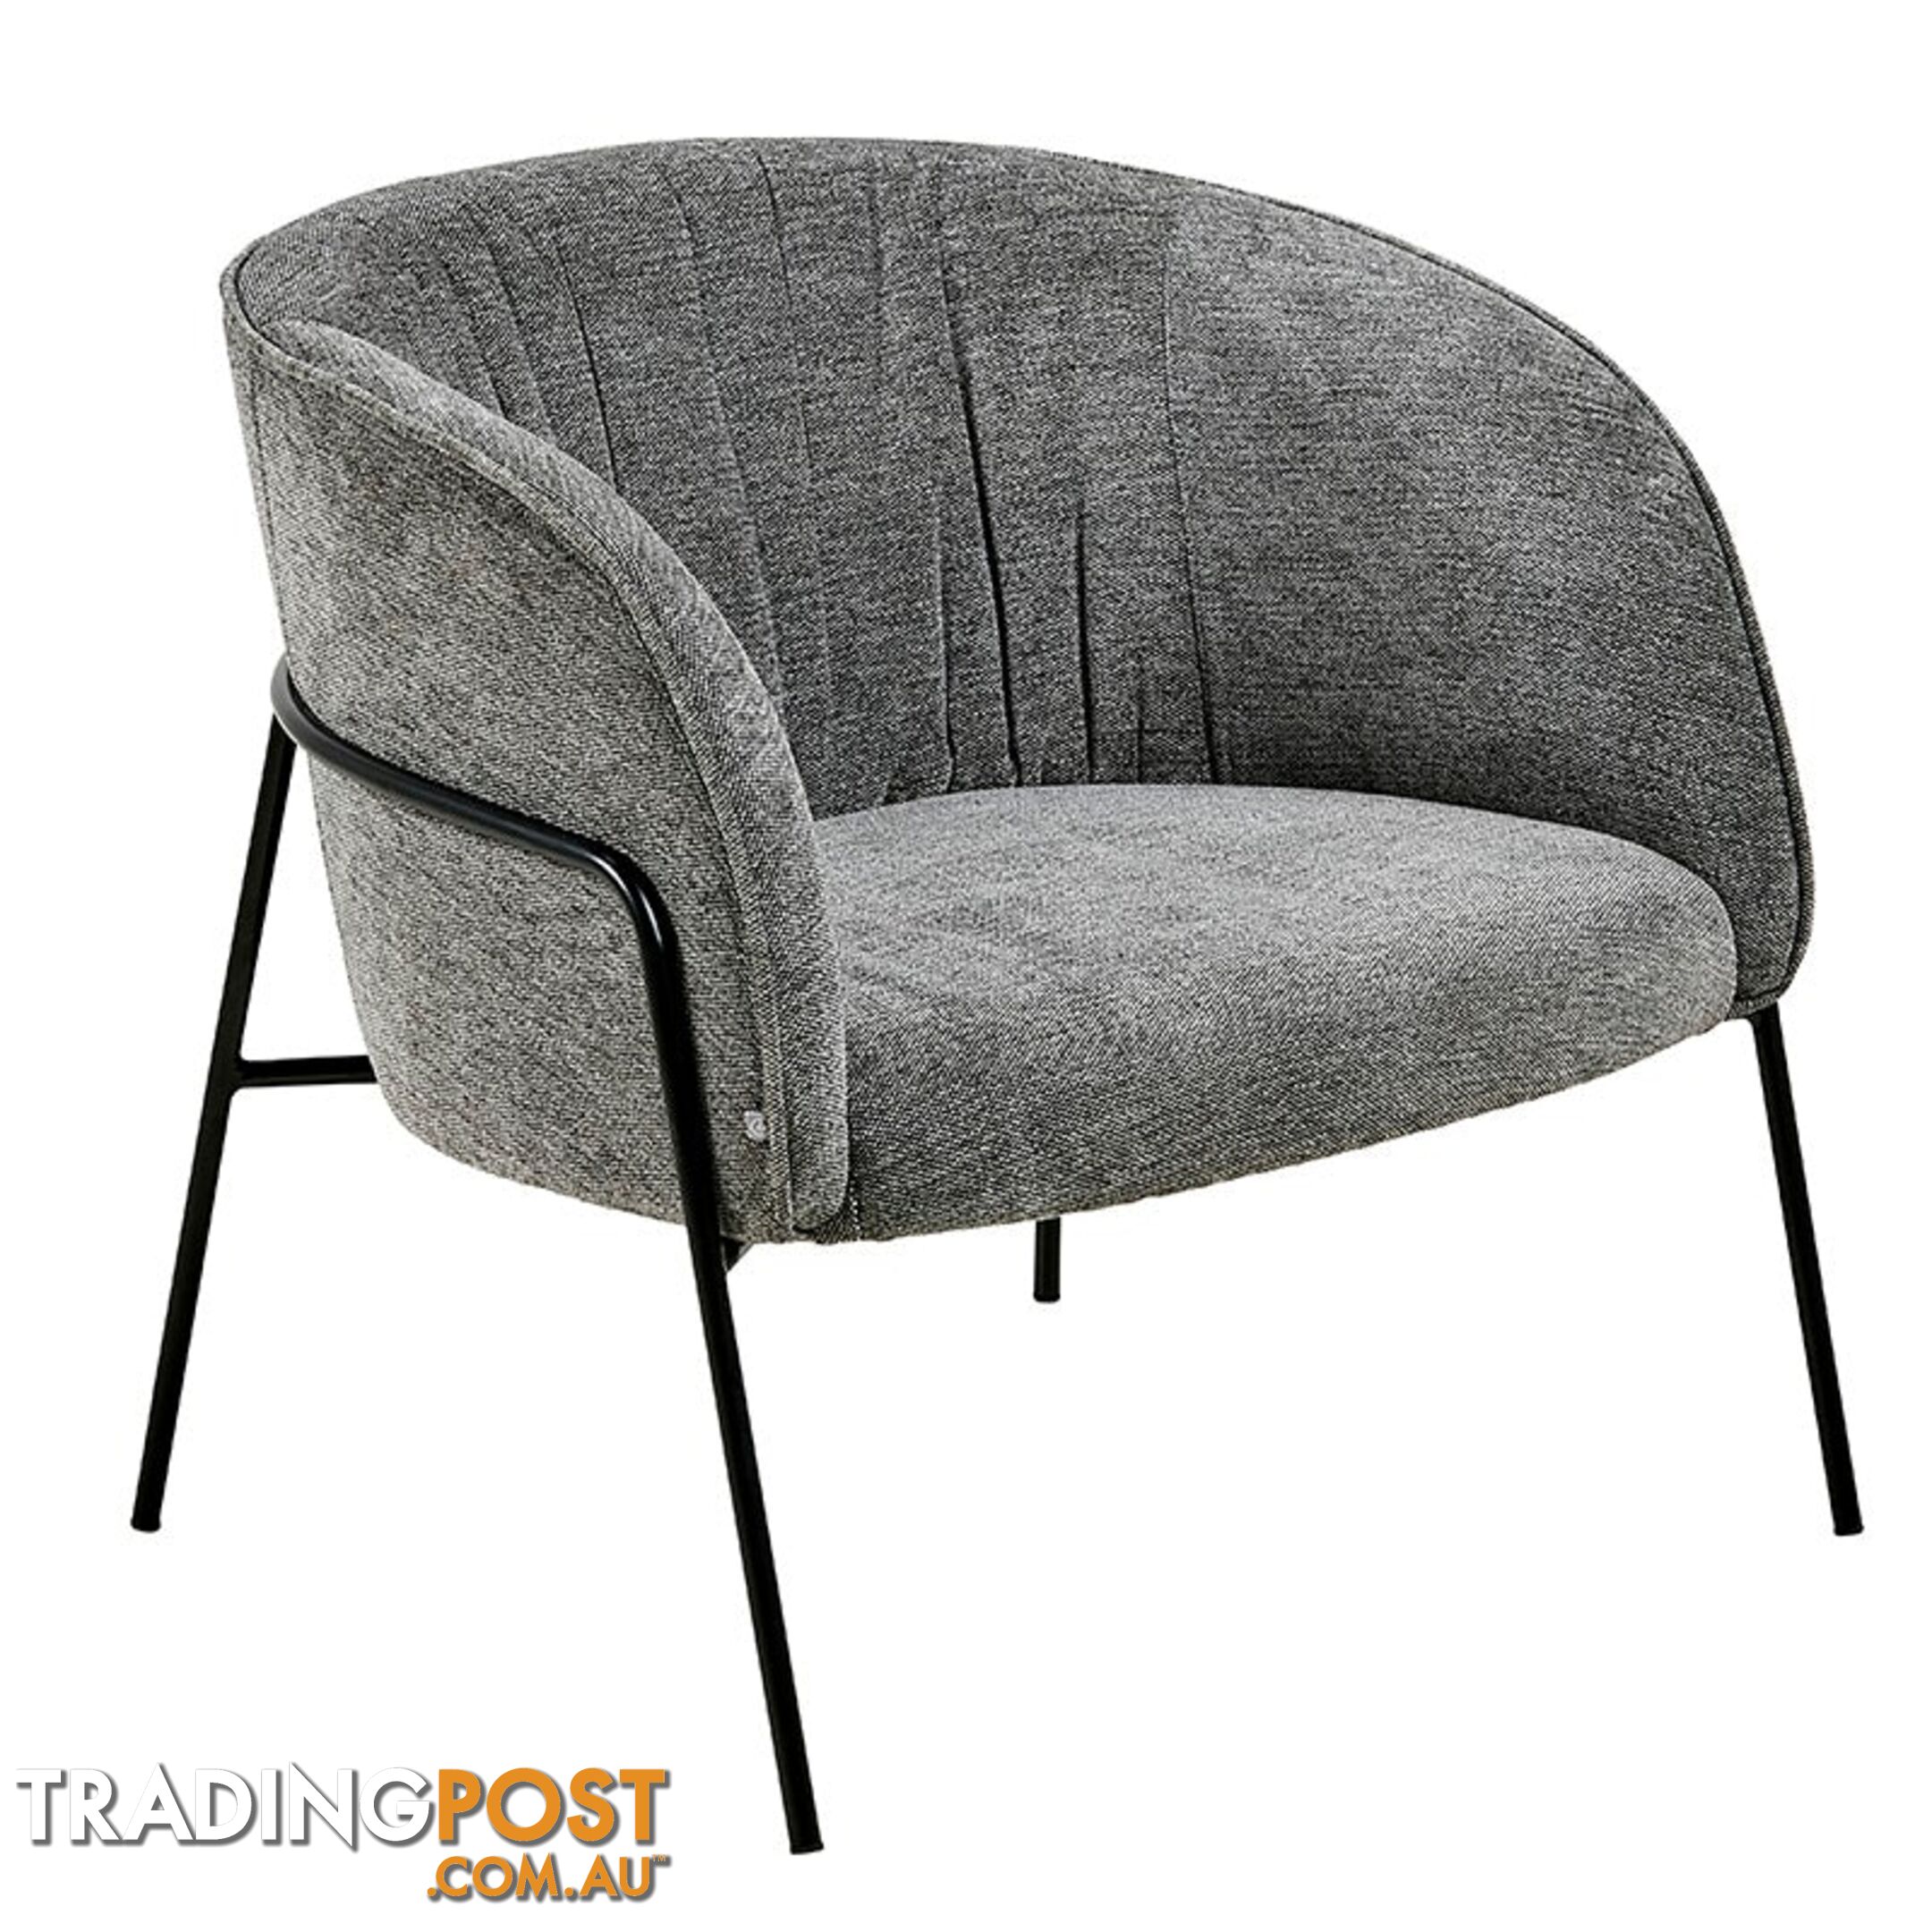 MILANI Lounge Chair - Anthracite - AC-0000081321 - 5713941061324